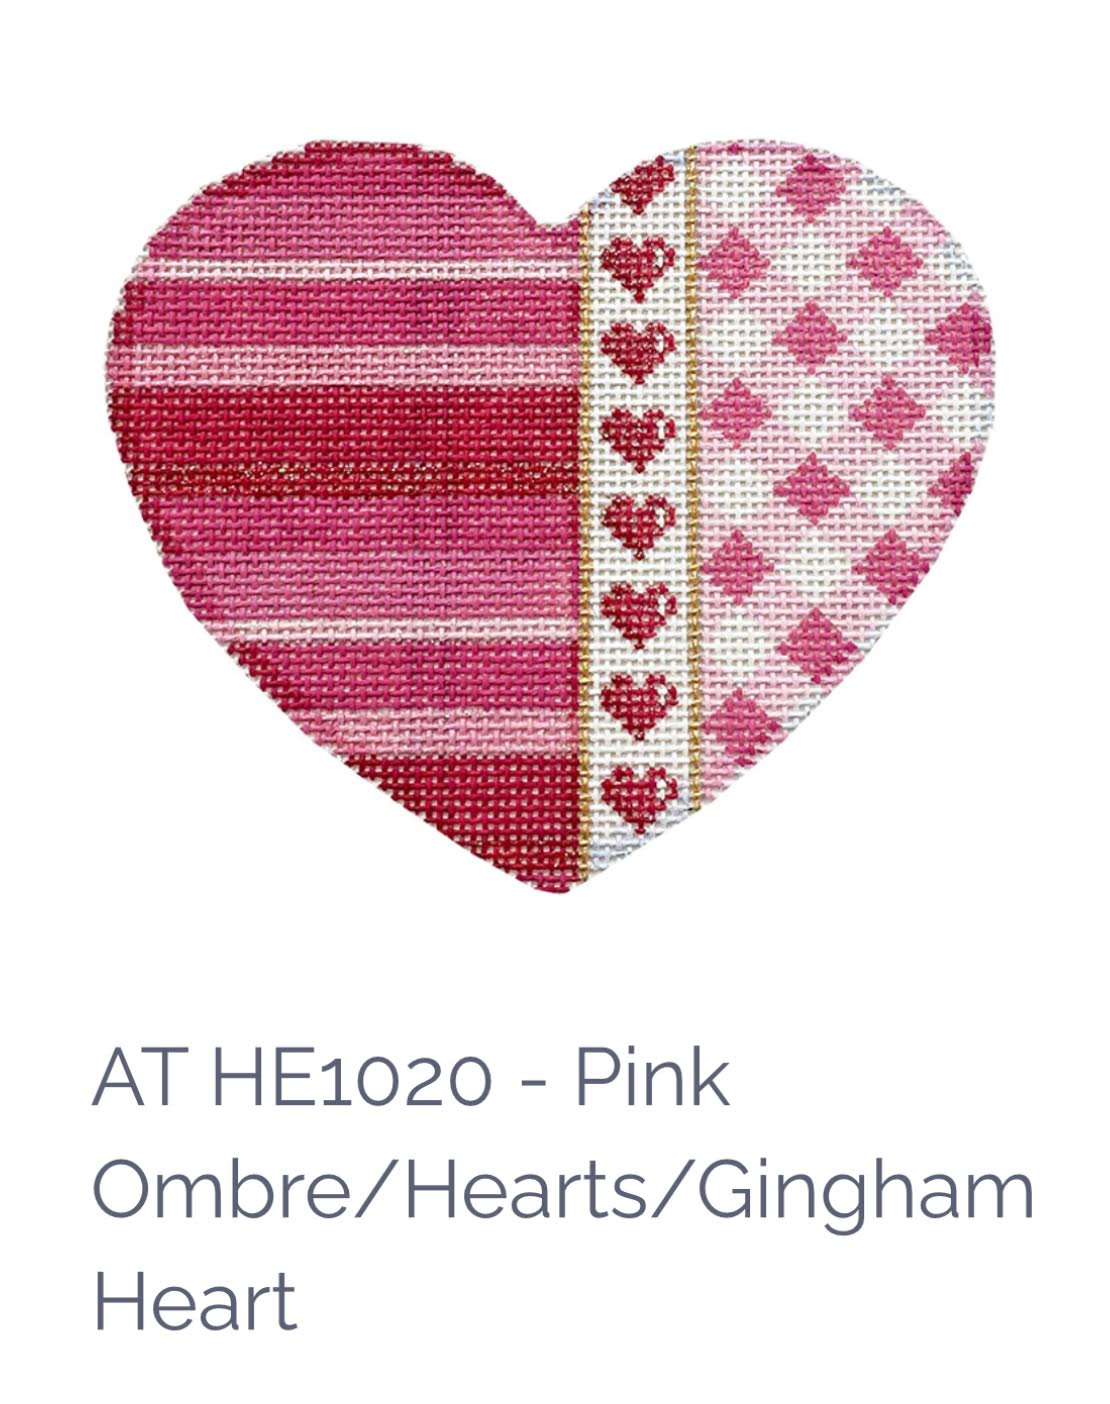 Associated Talents HE1020 Pink Ombre/Hearts/Gingham Heart